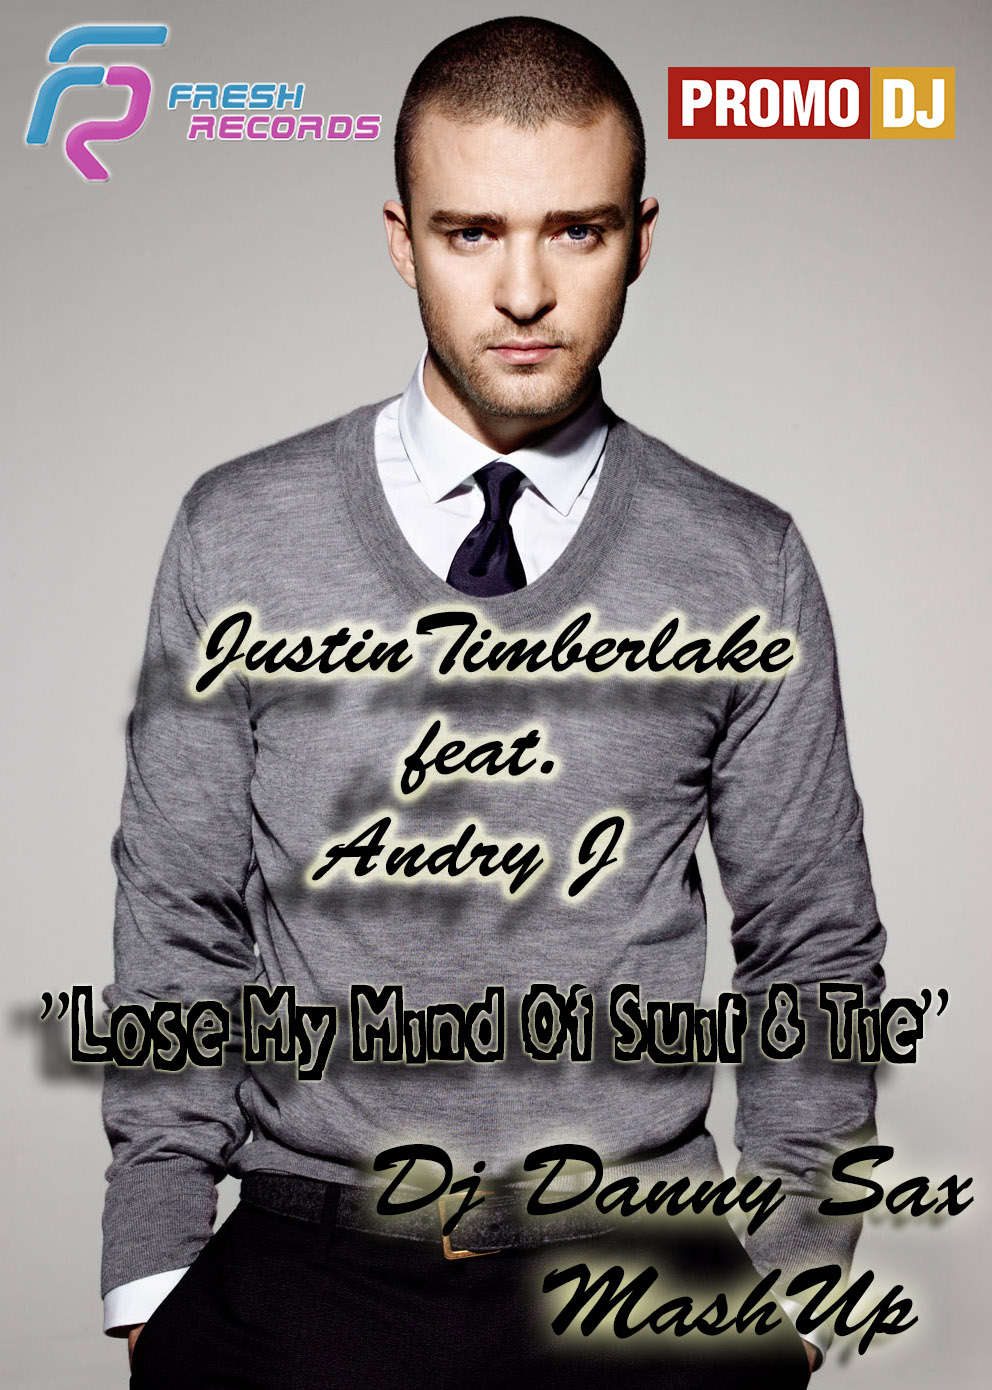 Justin Timberlake feat. Andry J - Lose My Mind Of Suit & Tie (Dj Danny Sax MashUp).mp3